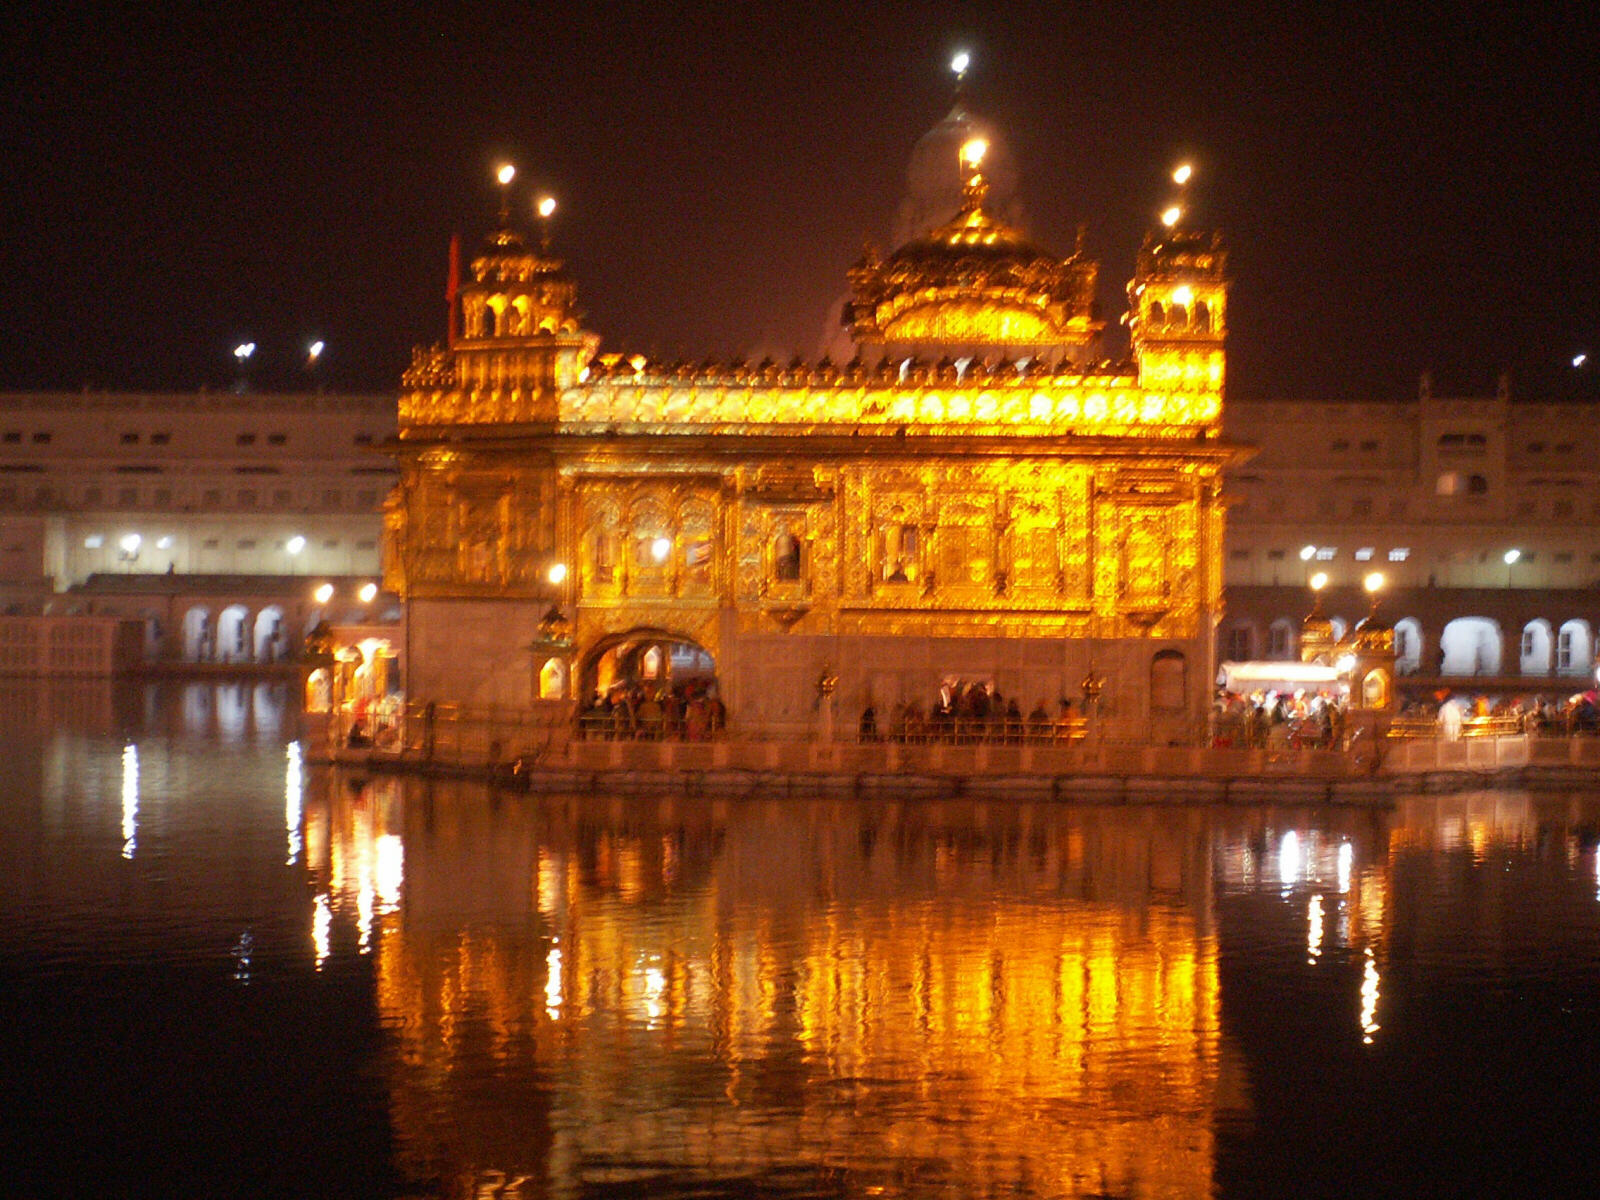 The Golden Temple at Amritsar, India